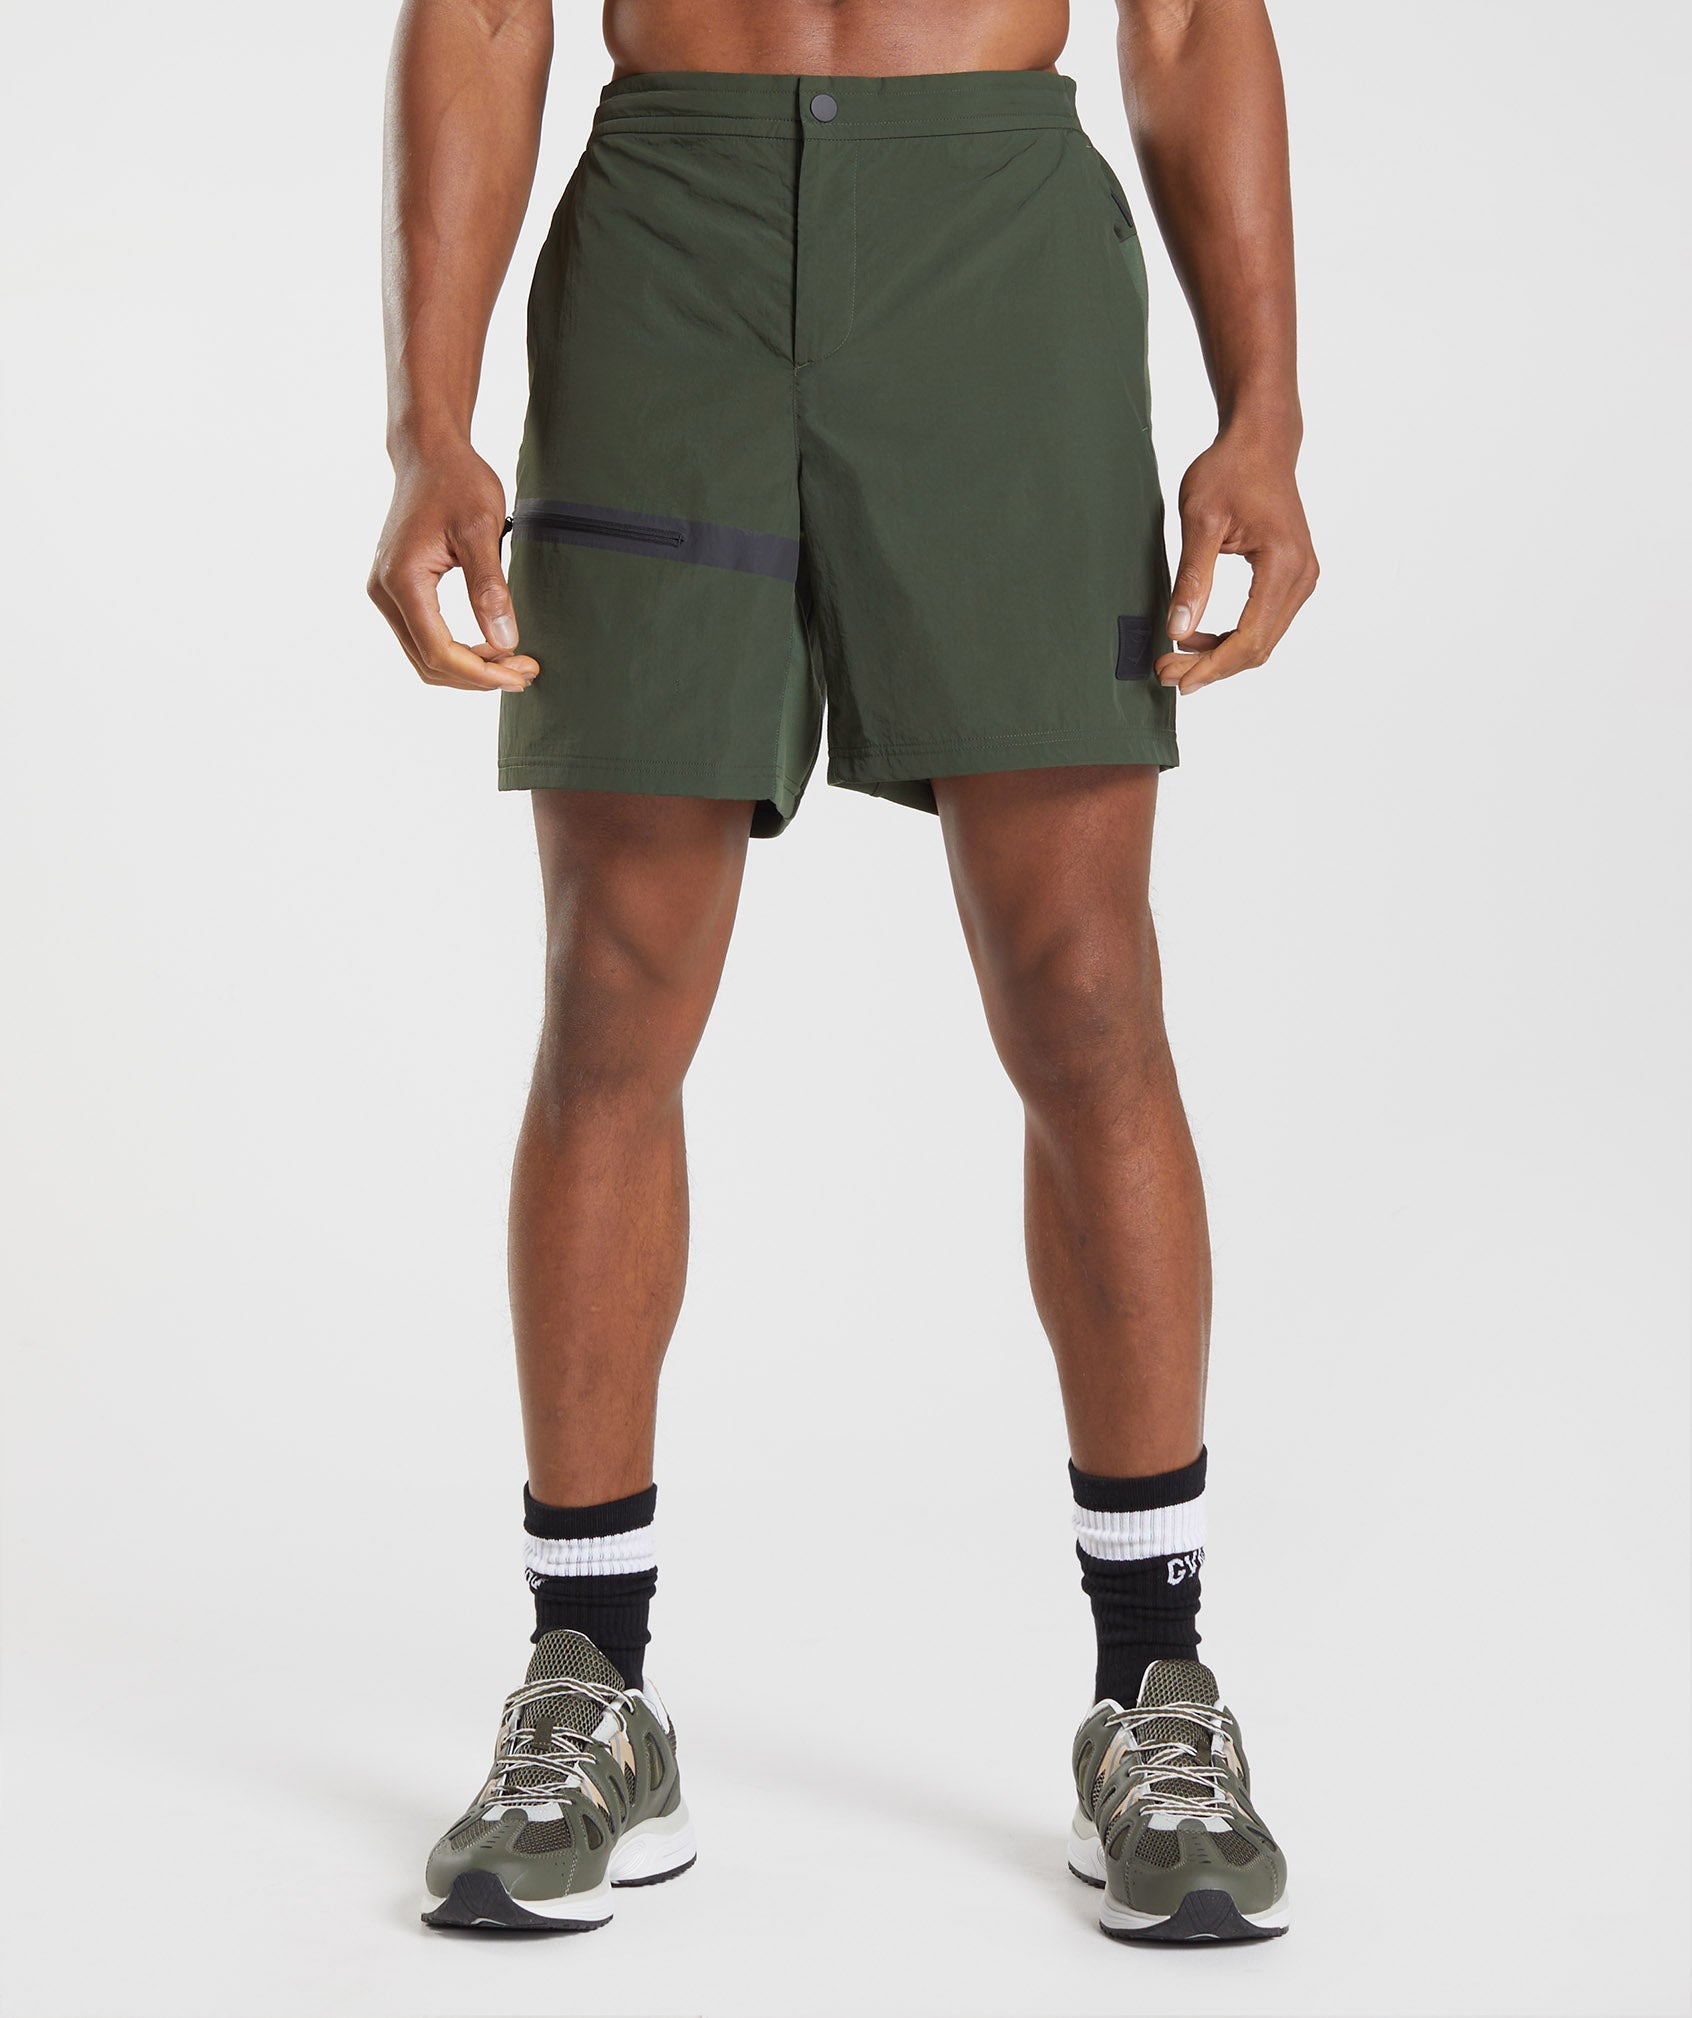 Retake Woven 7" Shorts in Moss Olive - view 1